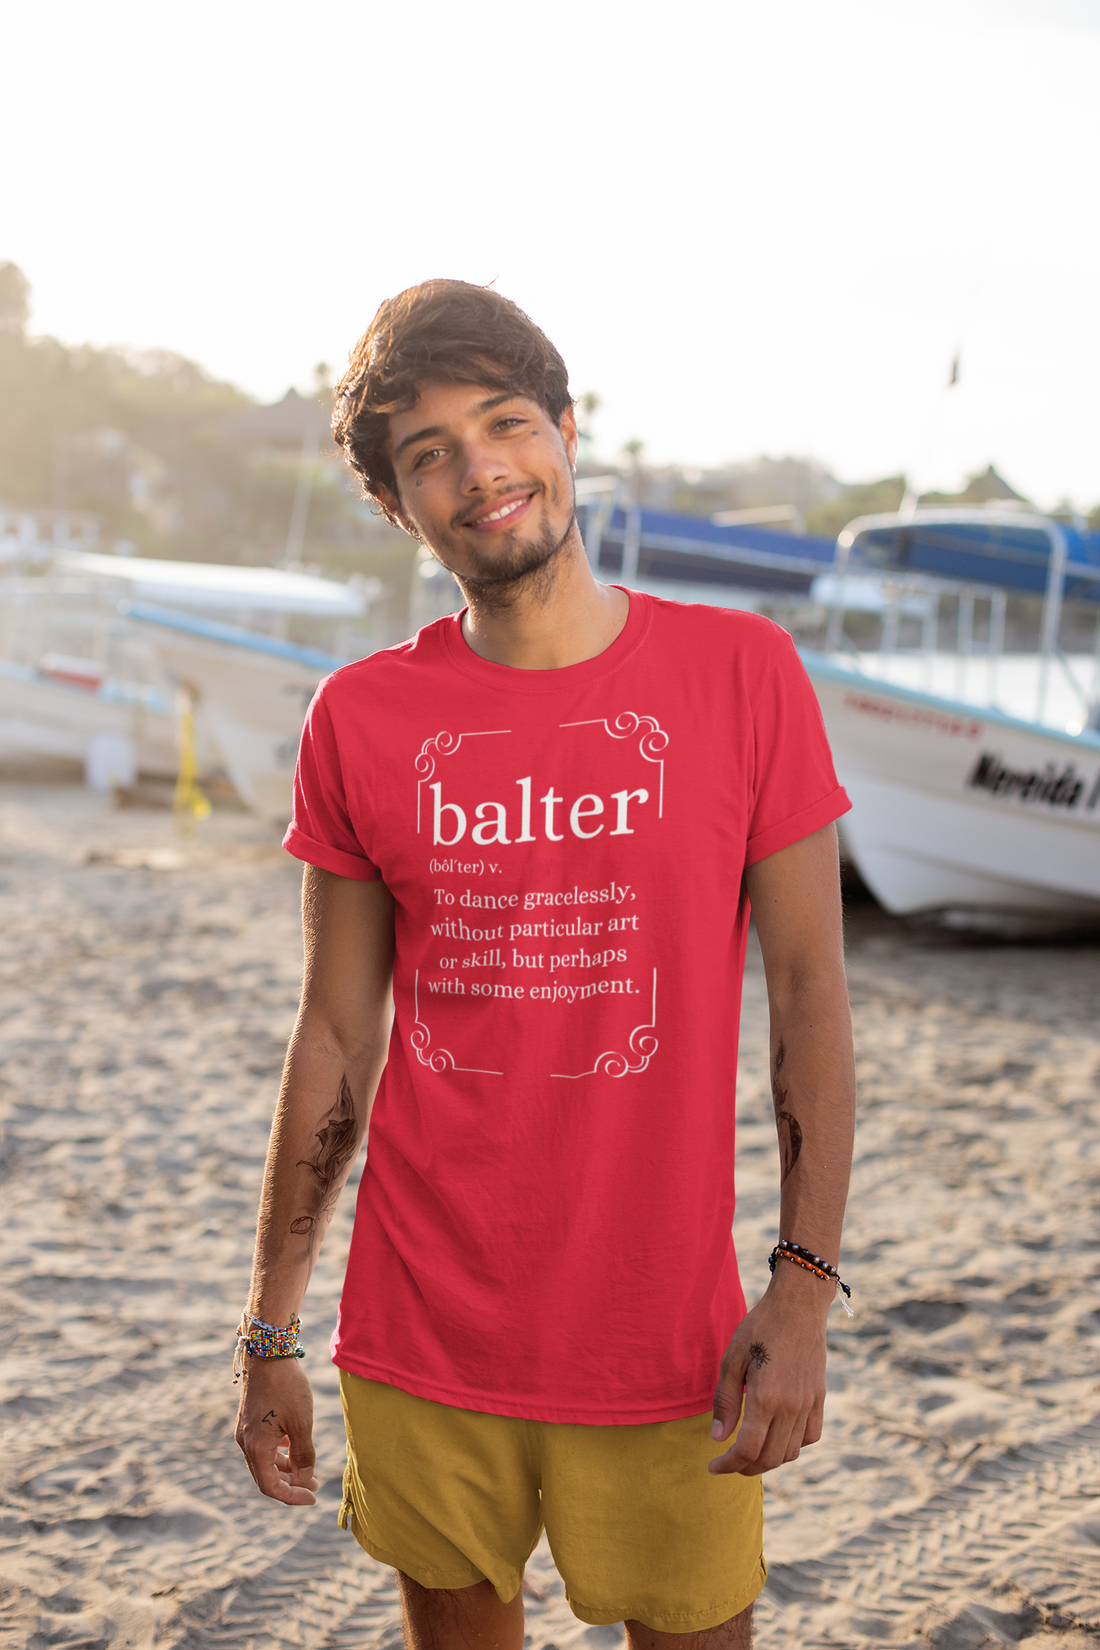 A male wearing a red music tshirt design with the text "Balter, To dance gracelessly without particular art or skill but perhaps with some enjoyment" and retro graphics surrounding it.